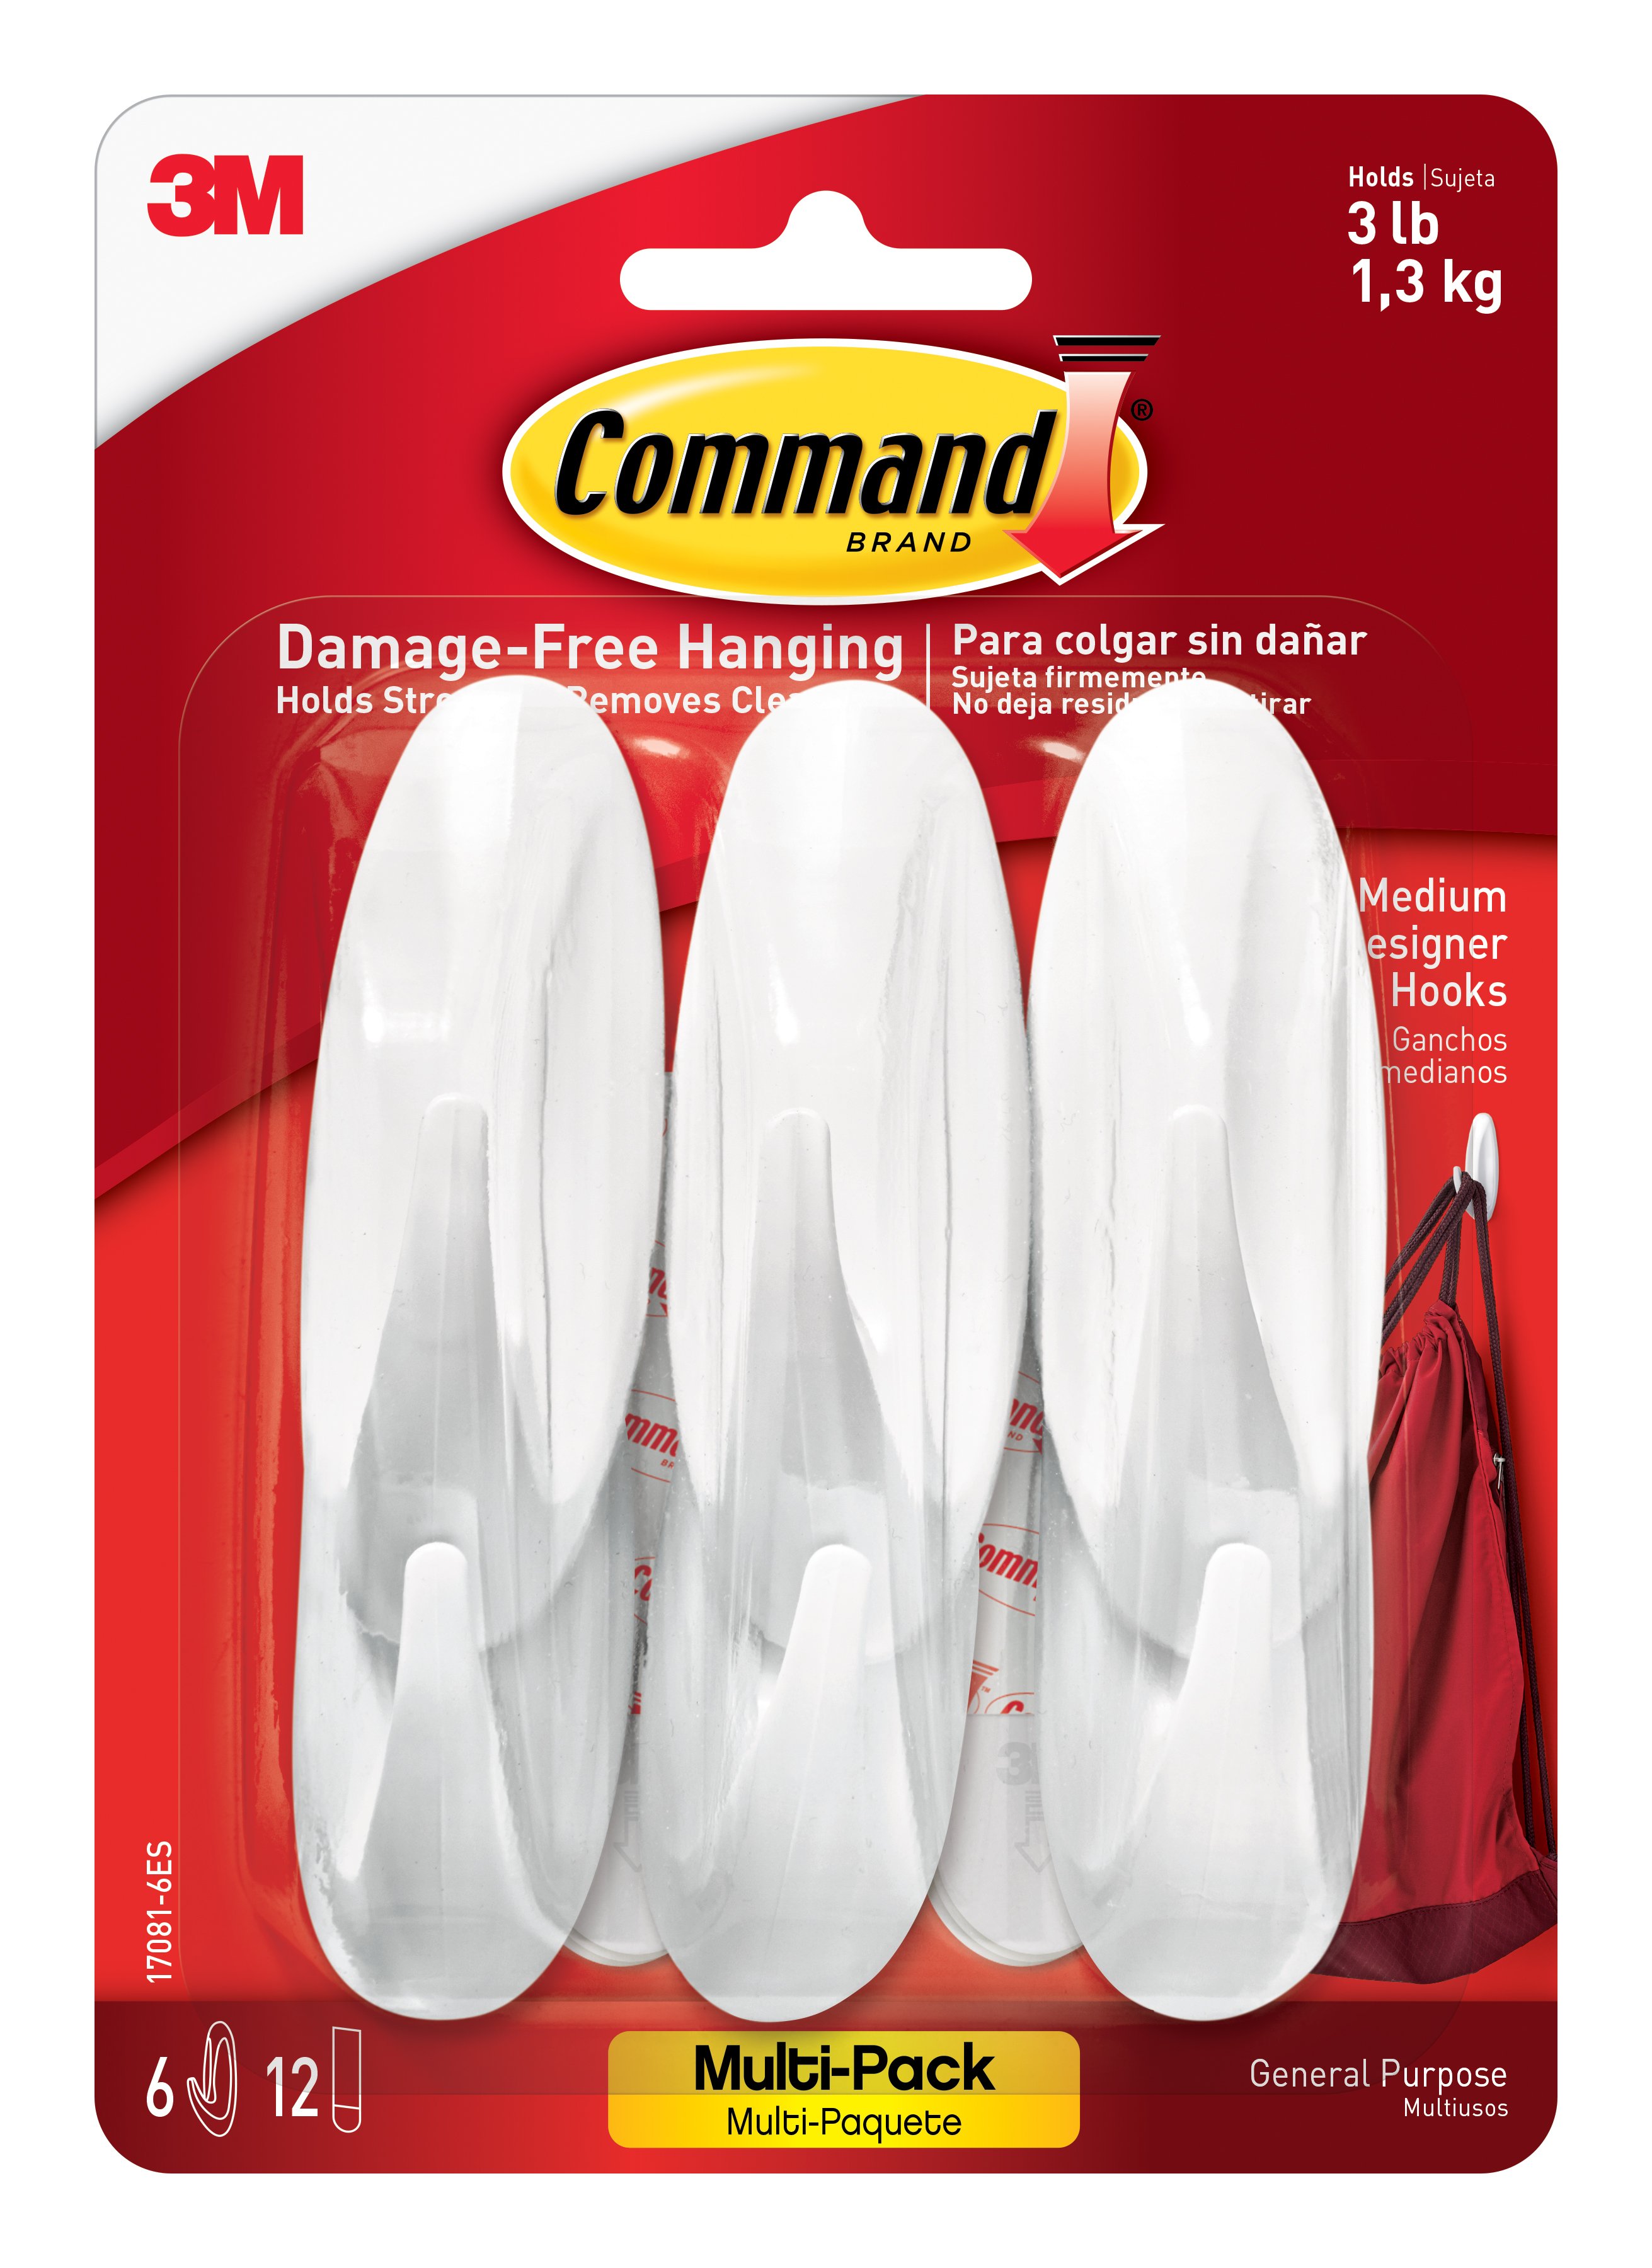 Command 4 Pack 3M Size Medium Damage Free Hanging Holds 12 lbs Lot of 4 b 